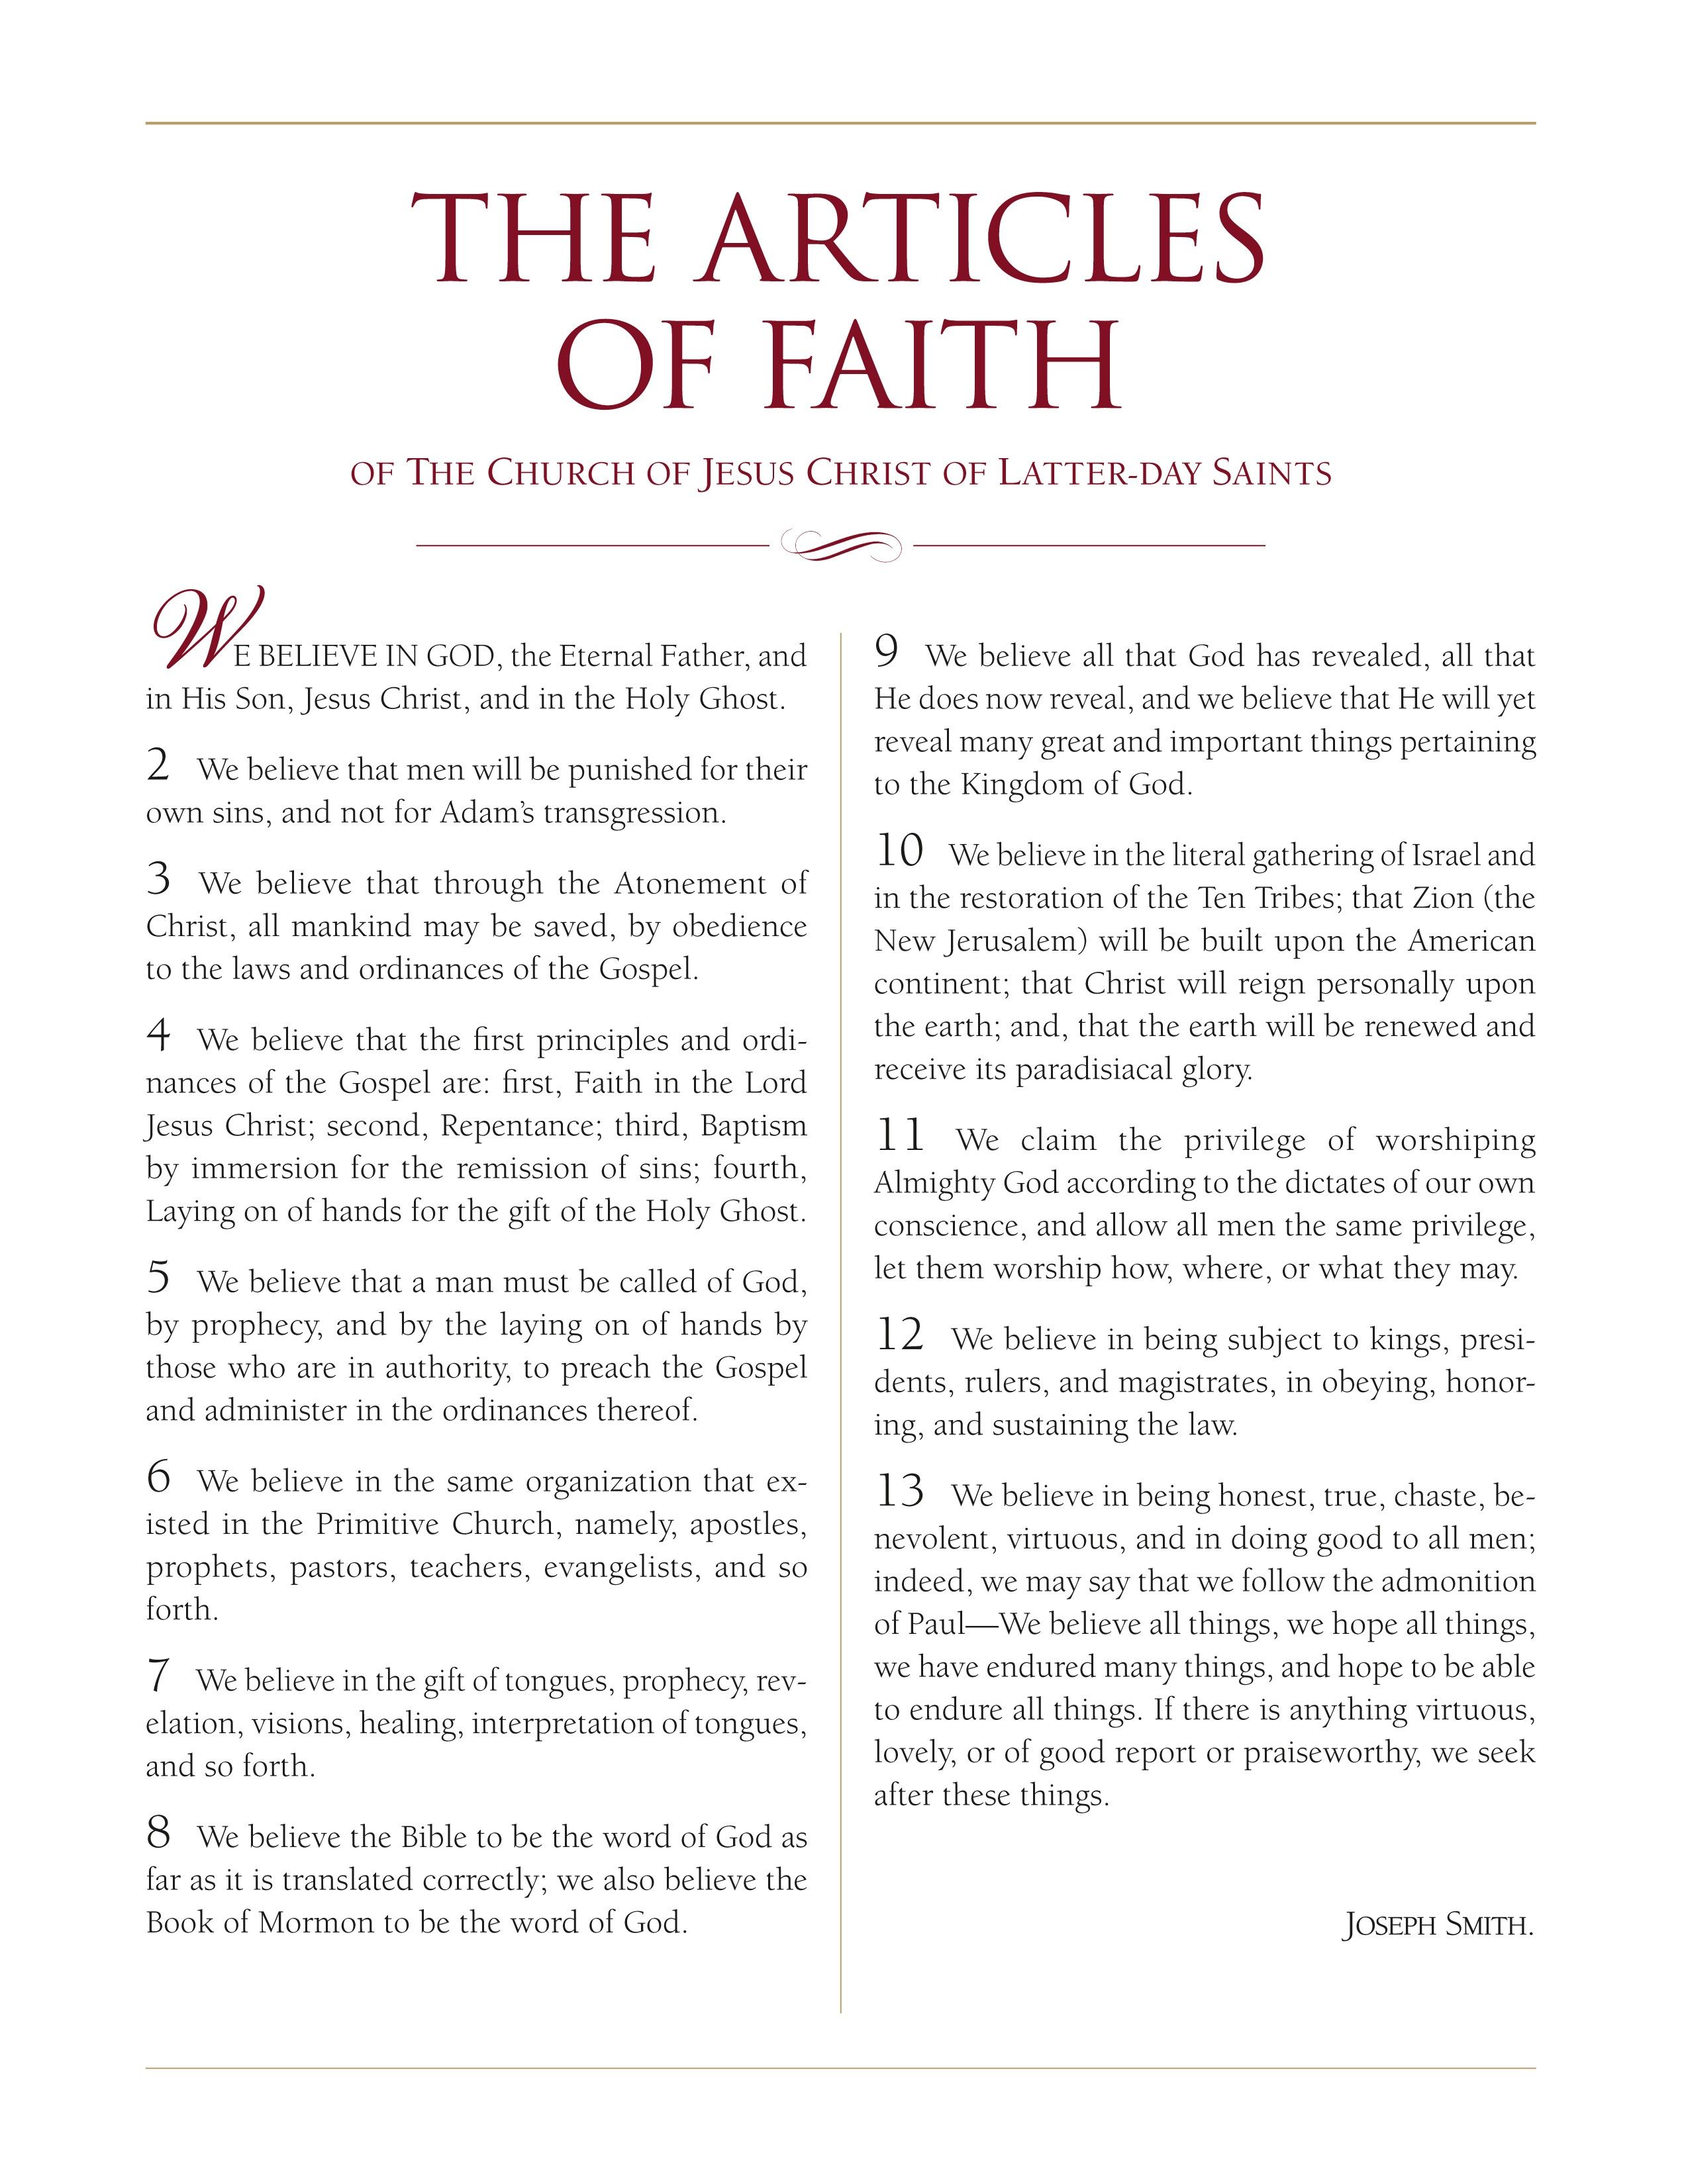 The official poster of “The Articles of Faith of The Church of Jesus Christ of Latter-day Saints.”